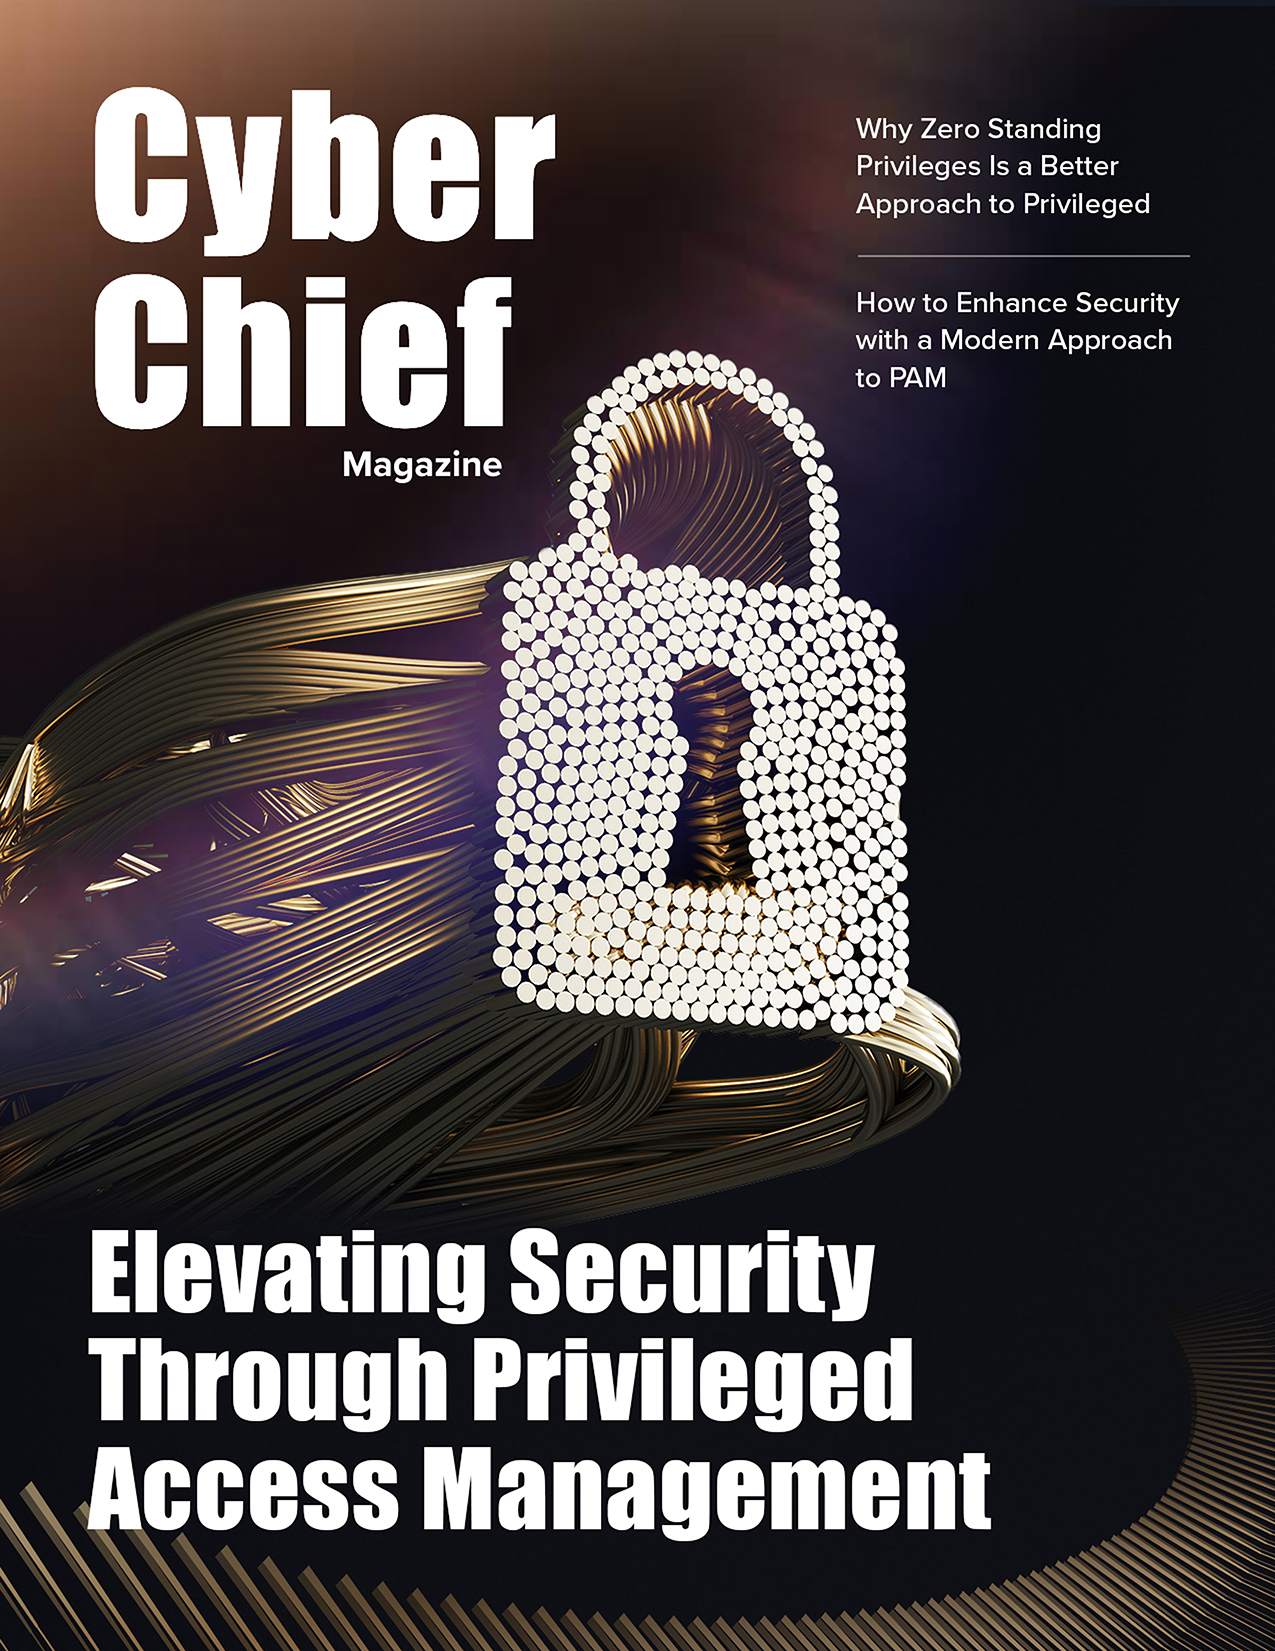 Elevating Security Through Privileged Access Management image